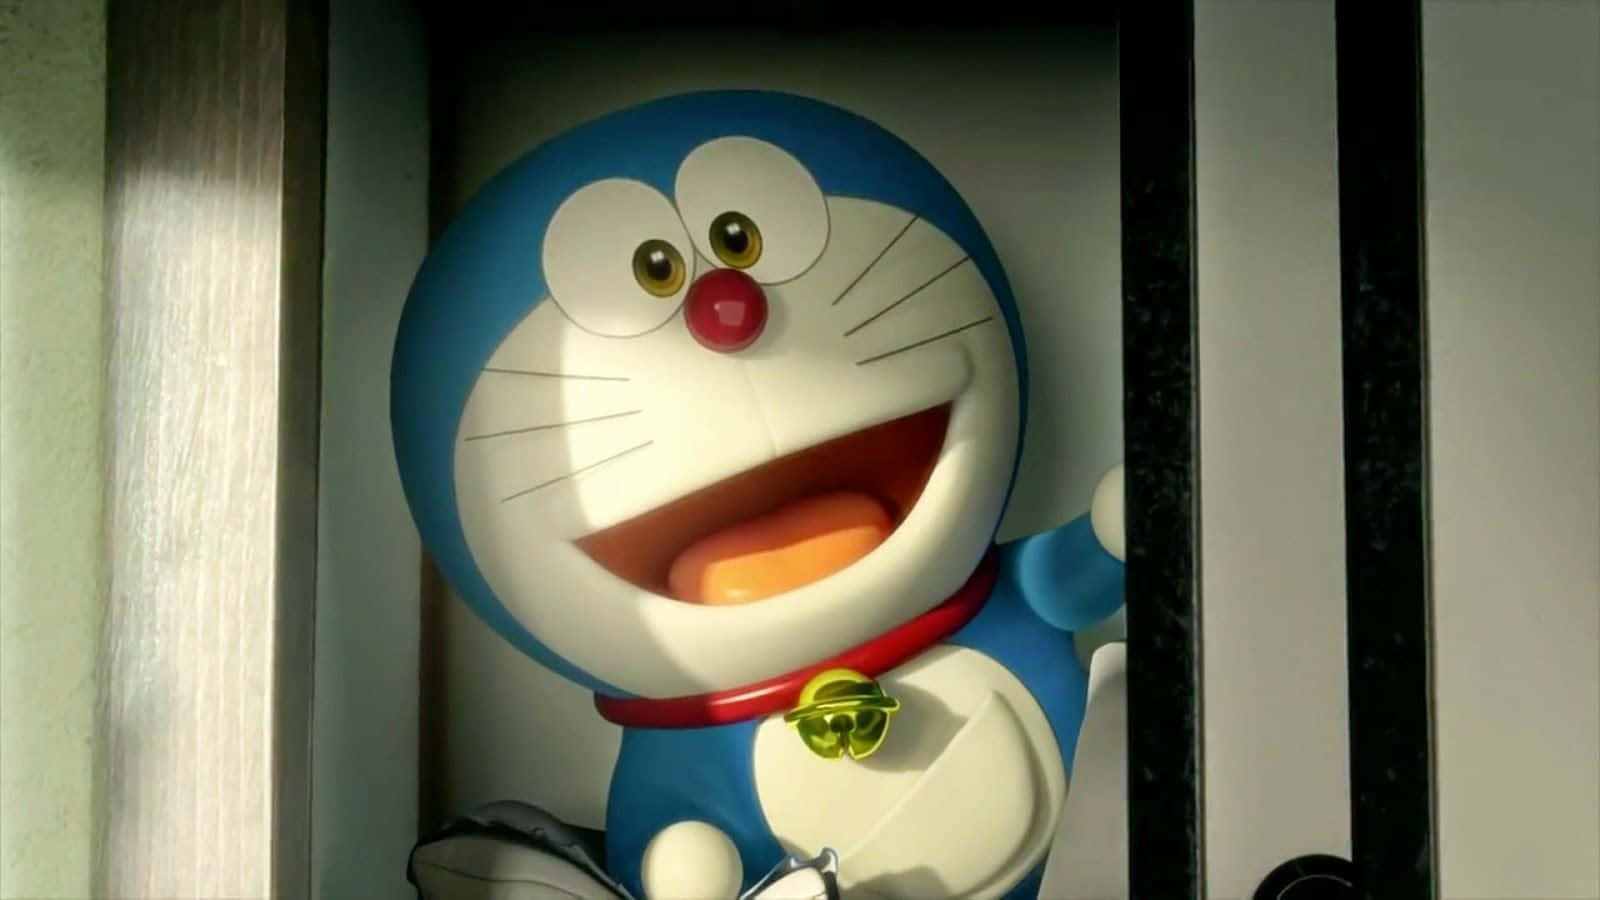 Doraemon: Ready to make your wishes come true